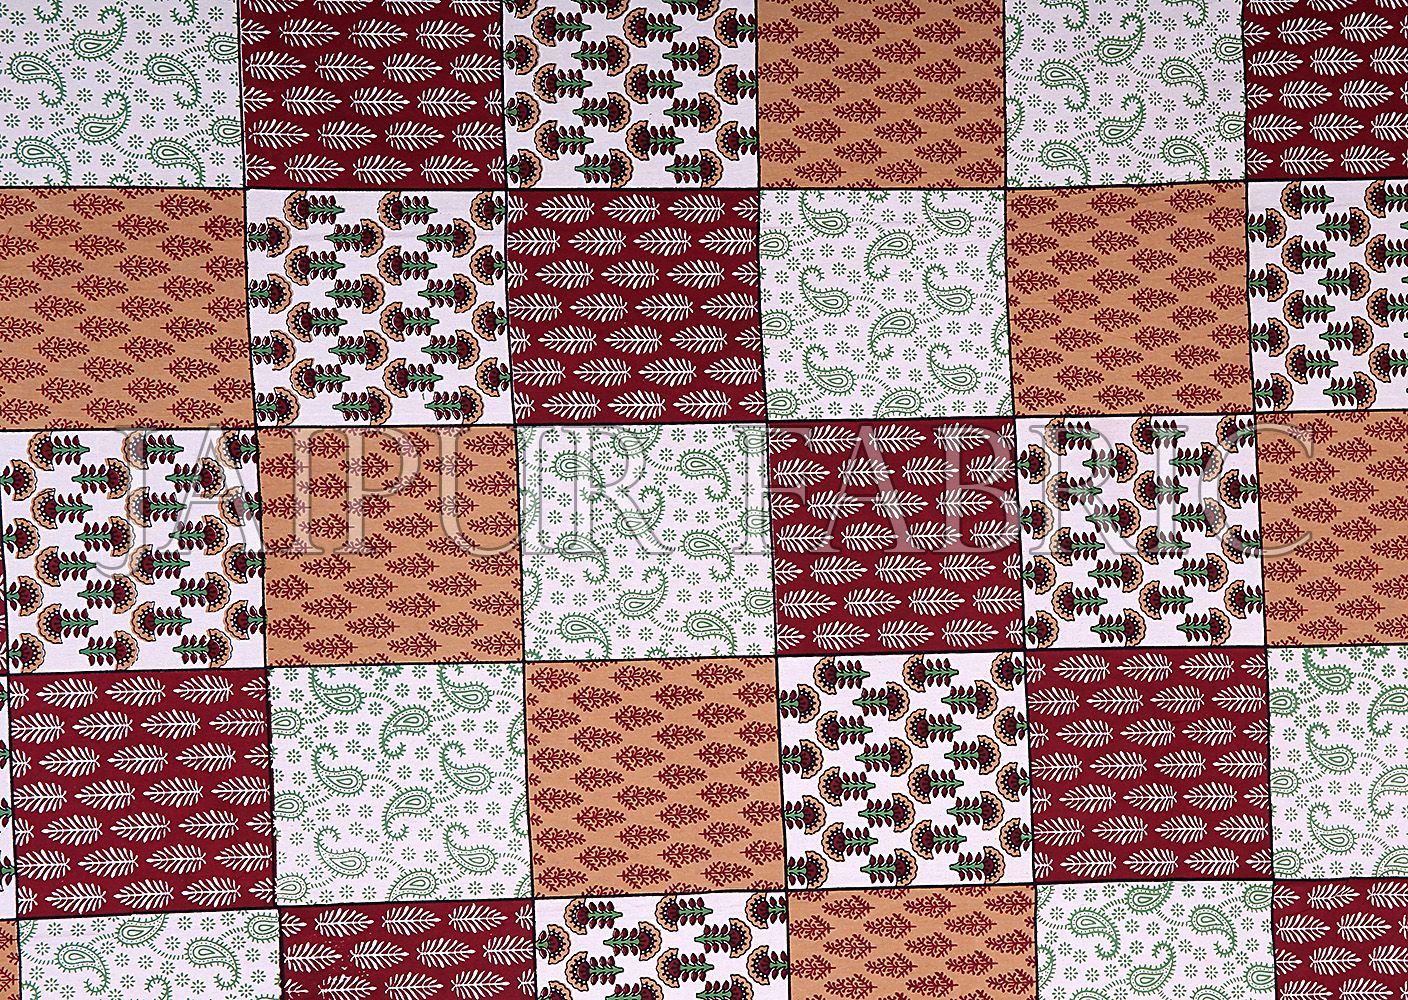 Brown Border Square Pattern Screen Print Cotton Double Bed Sheet